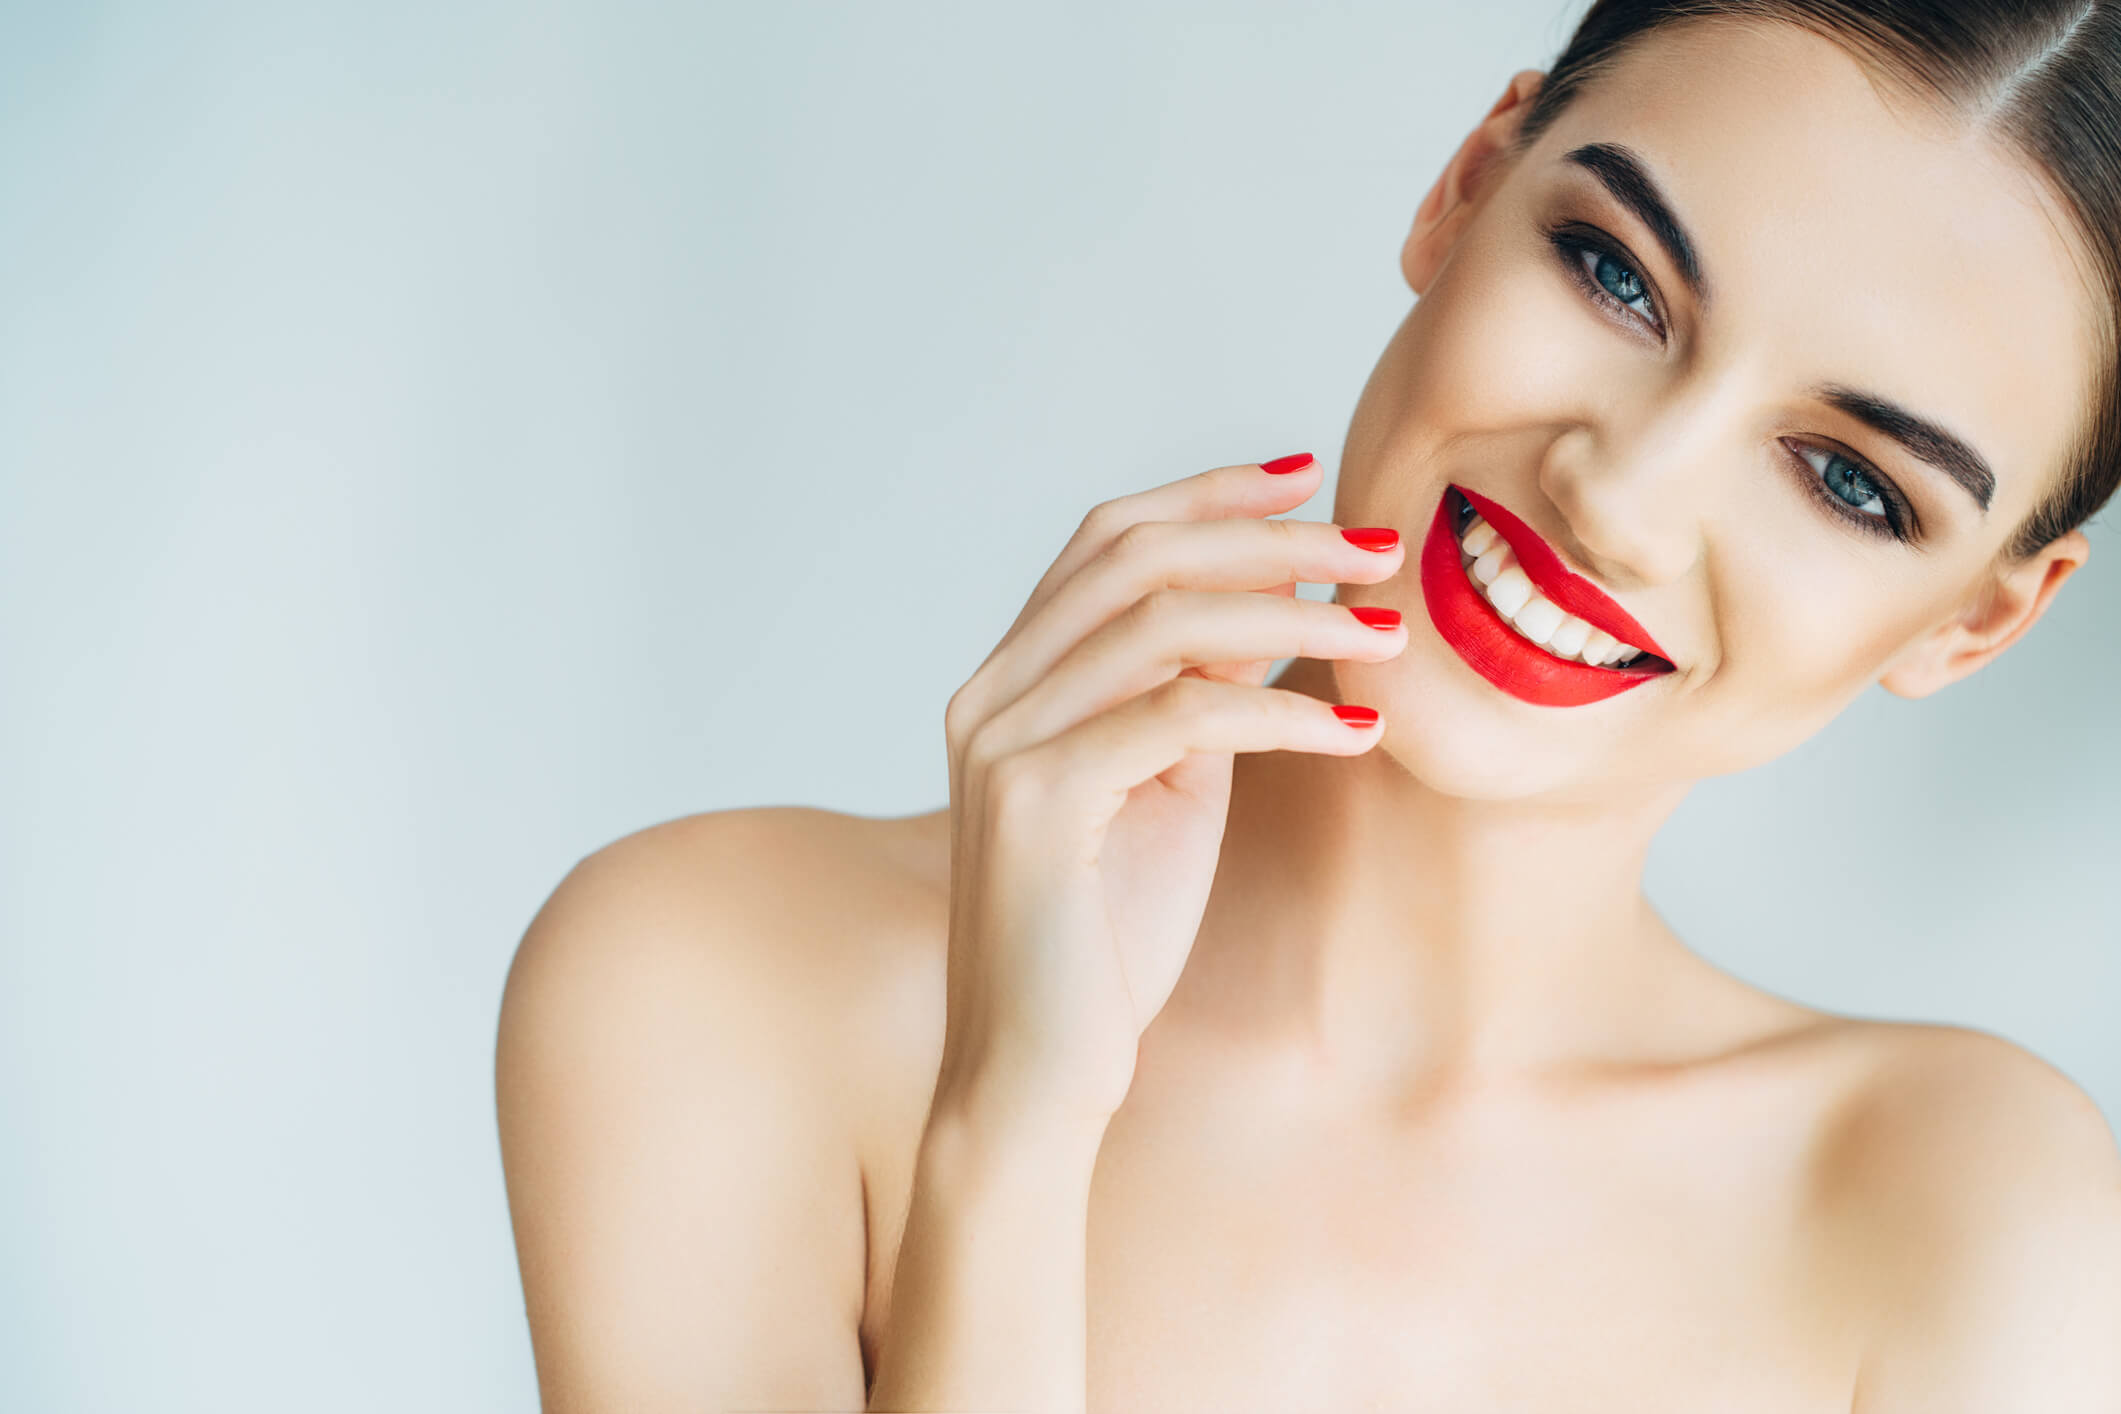 dermal-filler-frequently-asked-questions-dr-tom